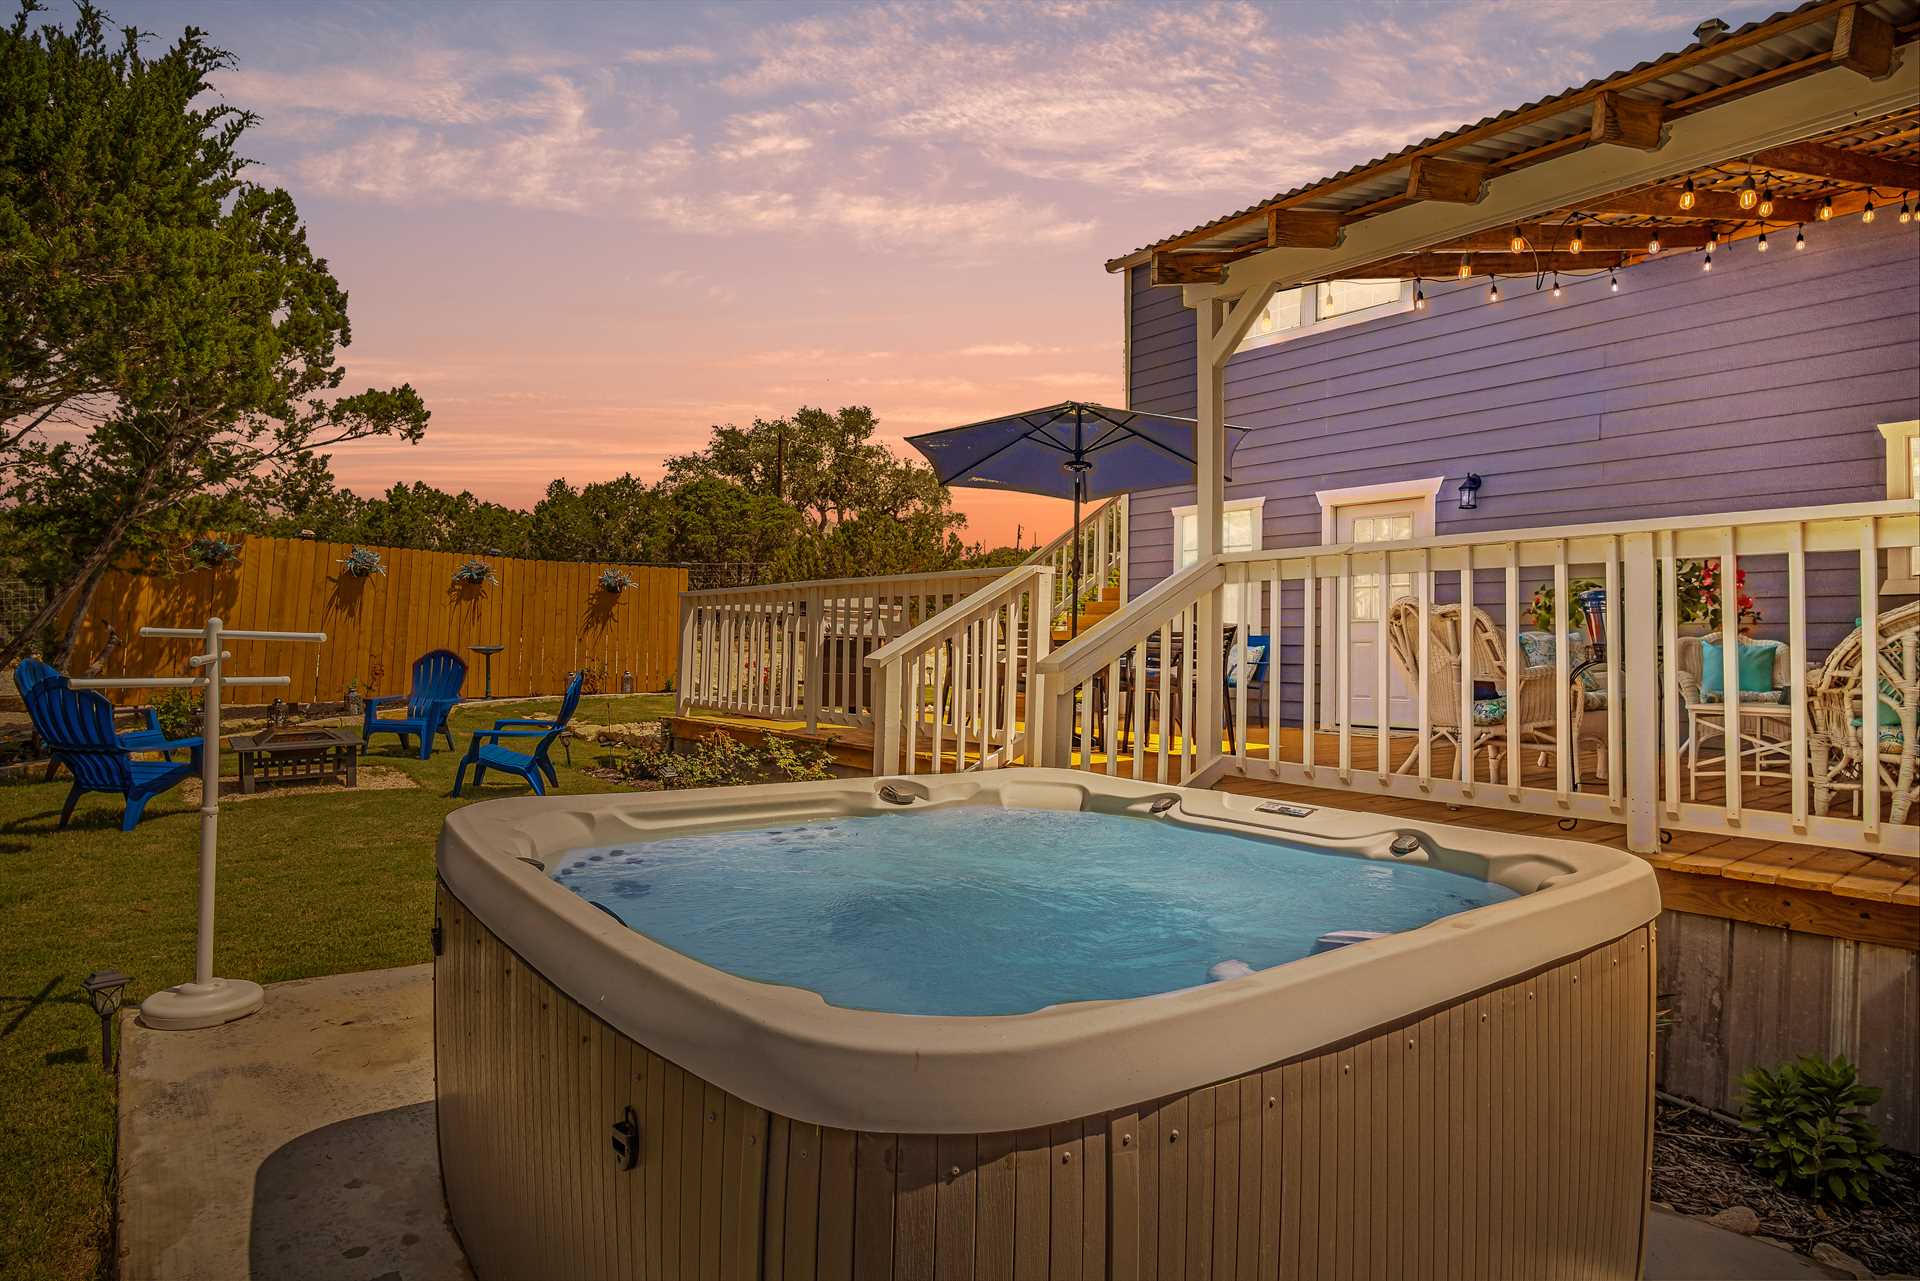                                                 Imagine slooooooooowly sinking into the soothing waters of the hot tub while you watch a colorful Hill Country sunset!